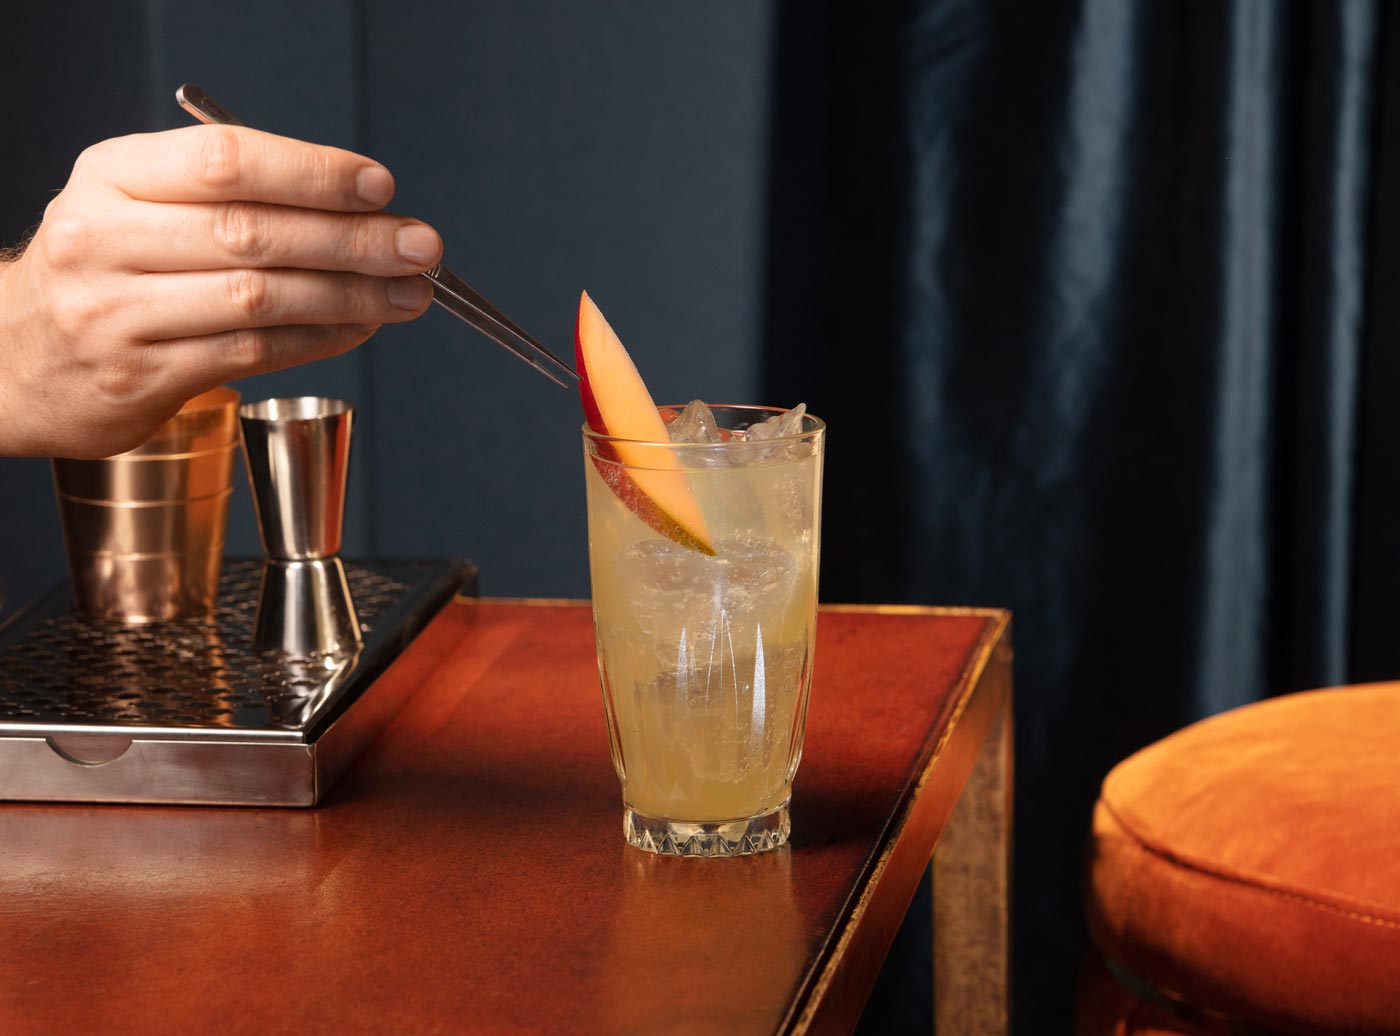 A highball glass is placed at the edge of a wooden bar. The glass contains ice and a pale orange drink. A male hand is holding long tweezers, placing a slice of apple atop the drink as a garnish. In the background there are drinks measures, and an orange bar stool next to the bar.